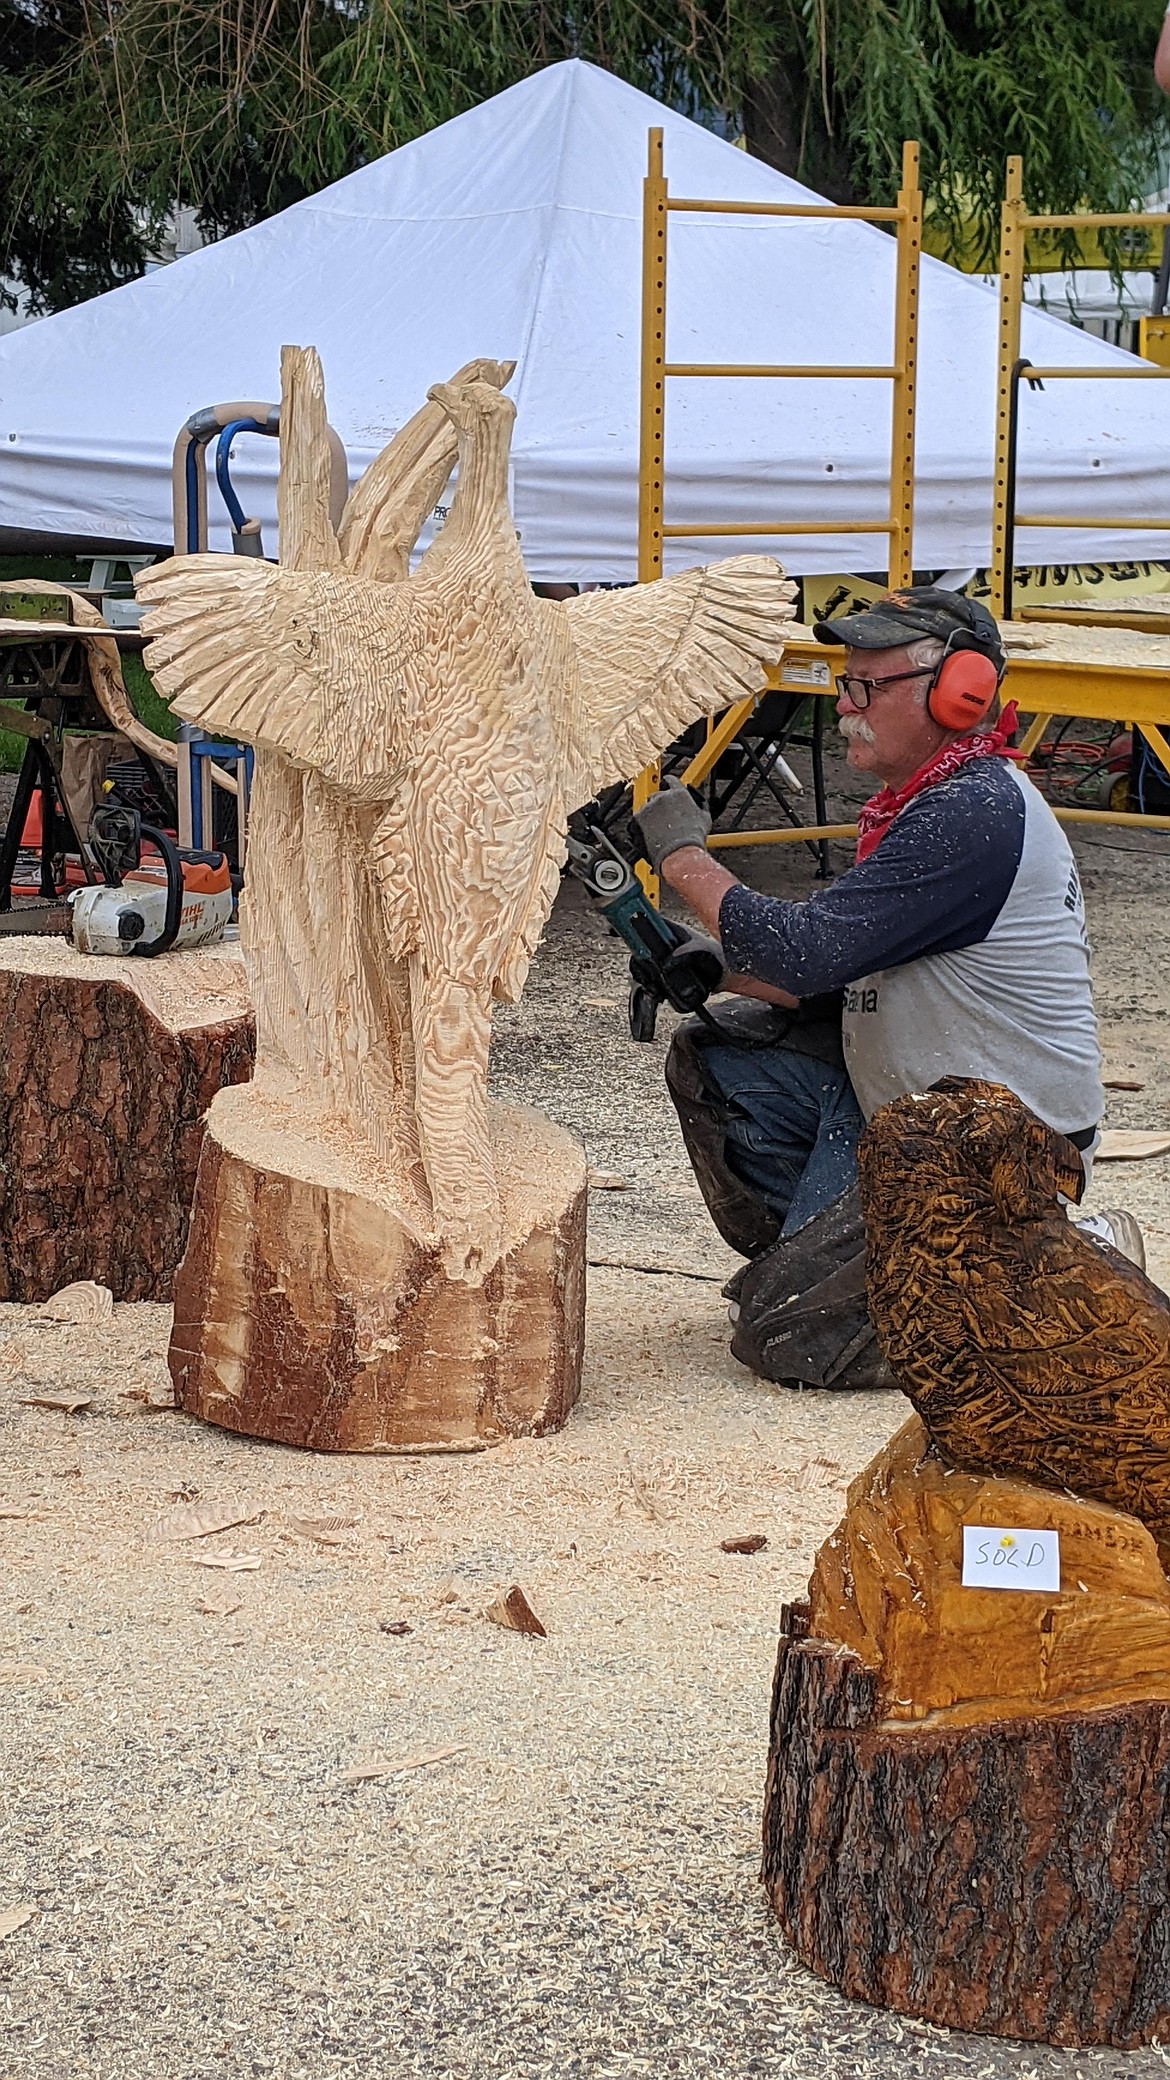 Ron Adamson breathes life into a pheasant sculpture. He took third place for his artistry at the Chainsaw Rendezvous. (Courtesy of Susan Lake)